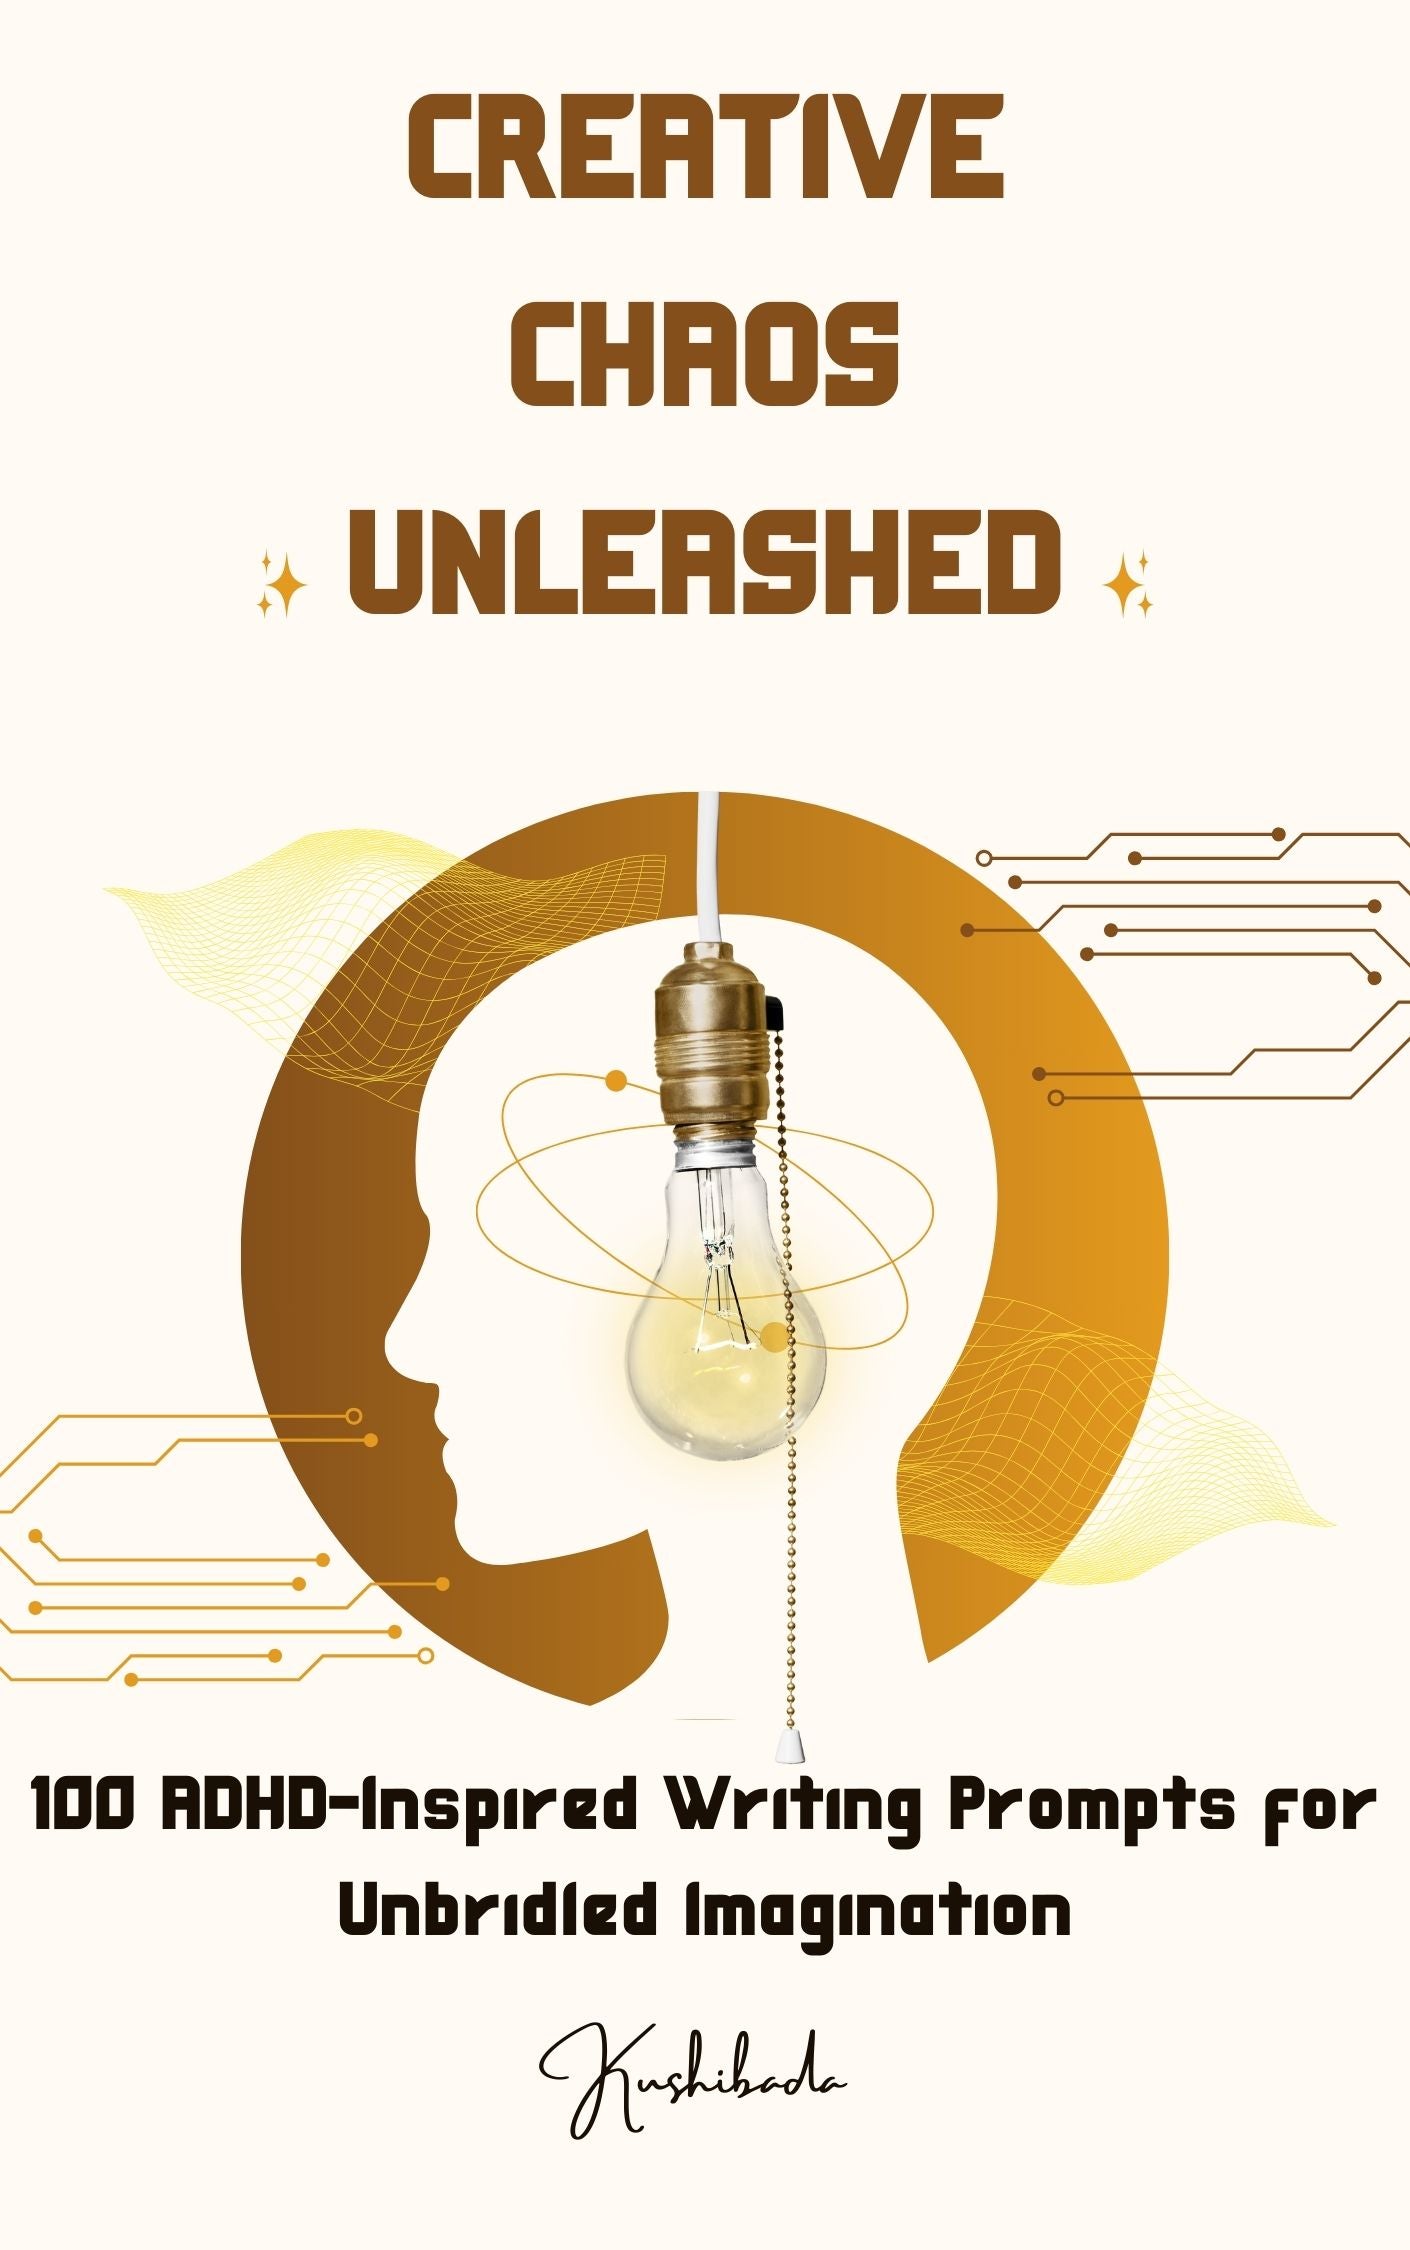 Creative Chaos Unleashed: 100 ADHD-Inspired Writing Prompts for Unbridled Imagination